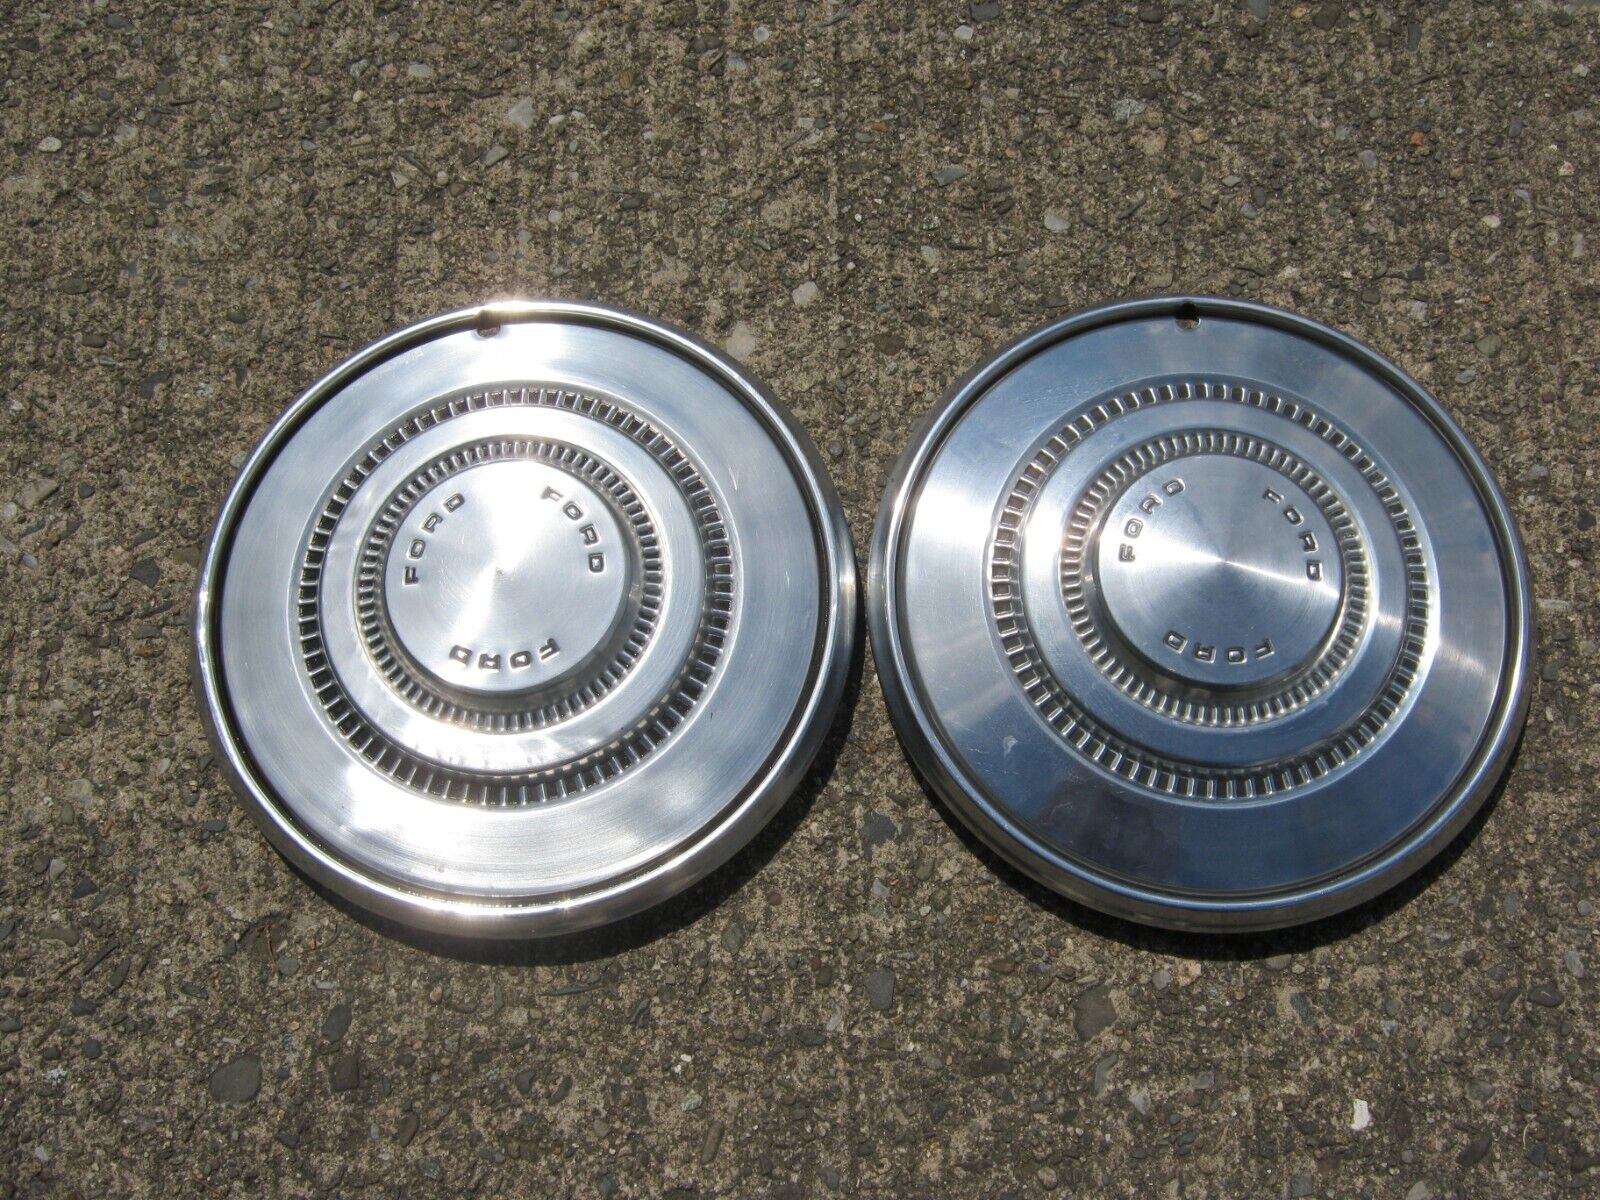 Genuine 1973 Ford LTD Galaxie 15 inch factory hubcaps wheel covers